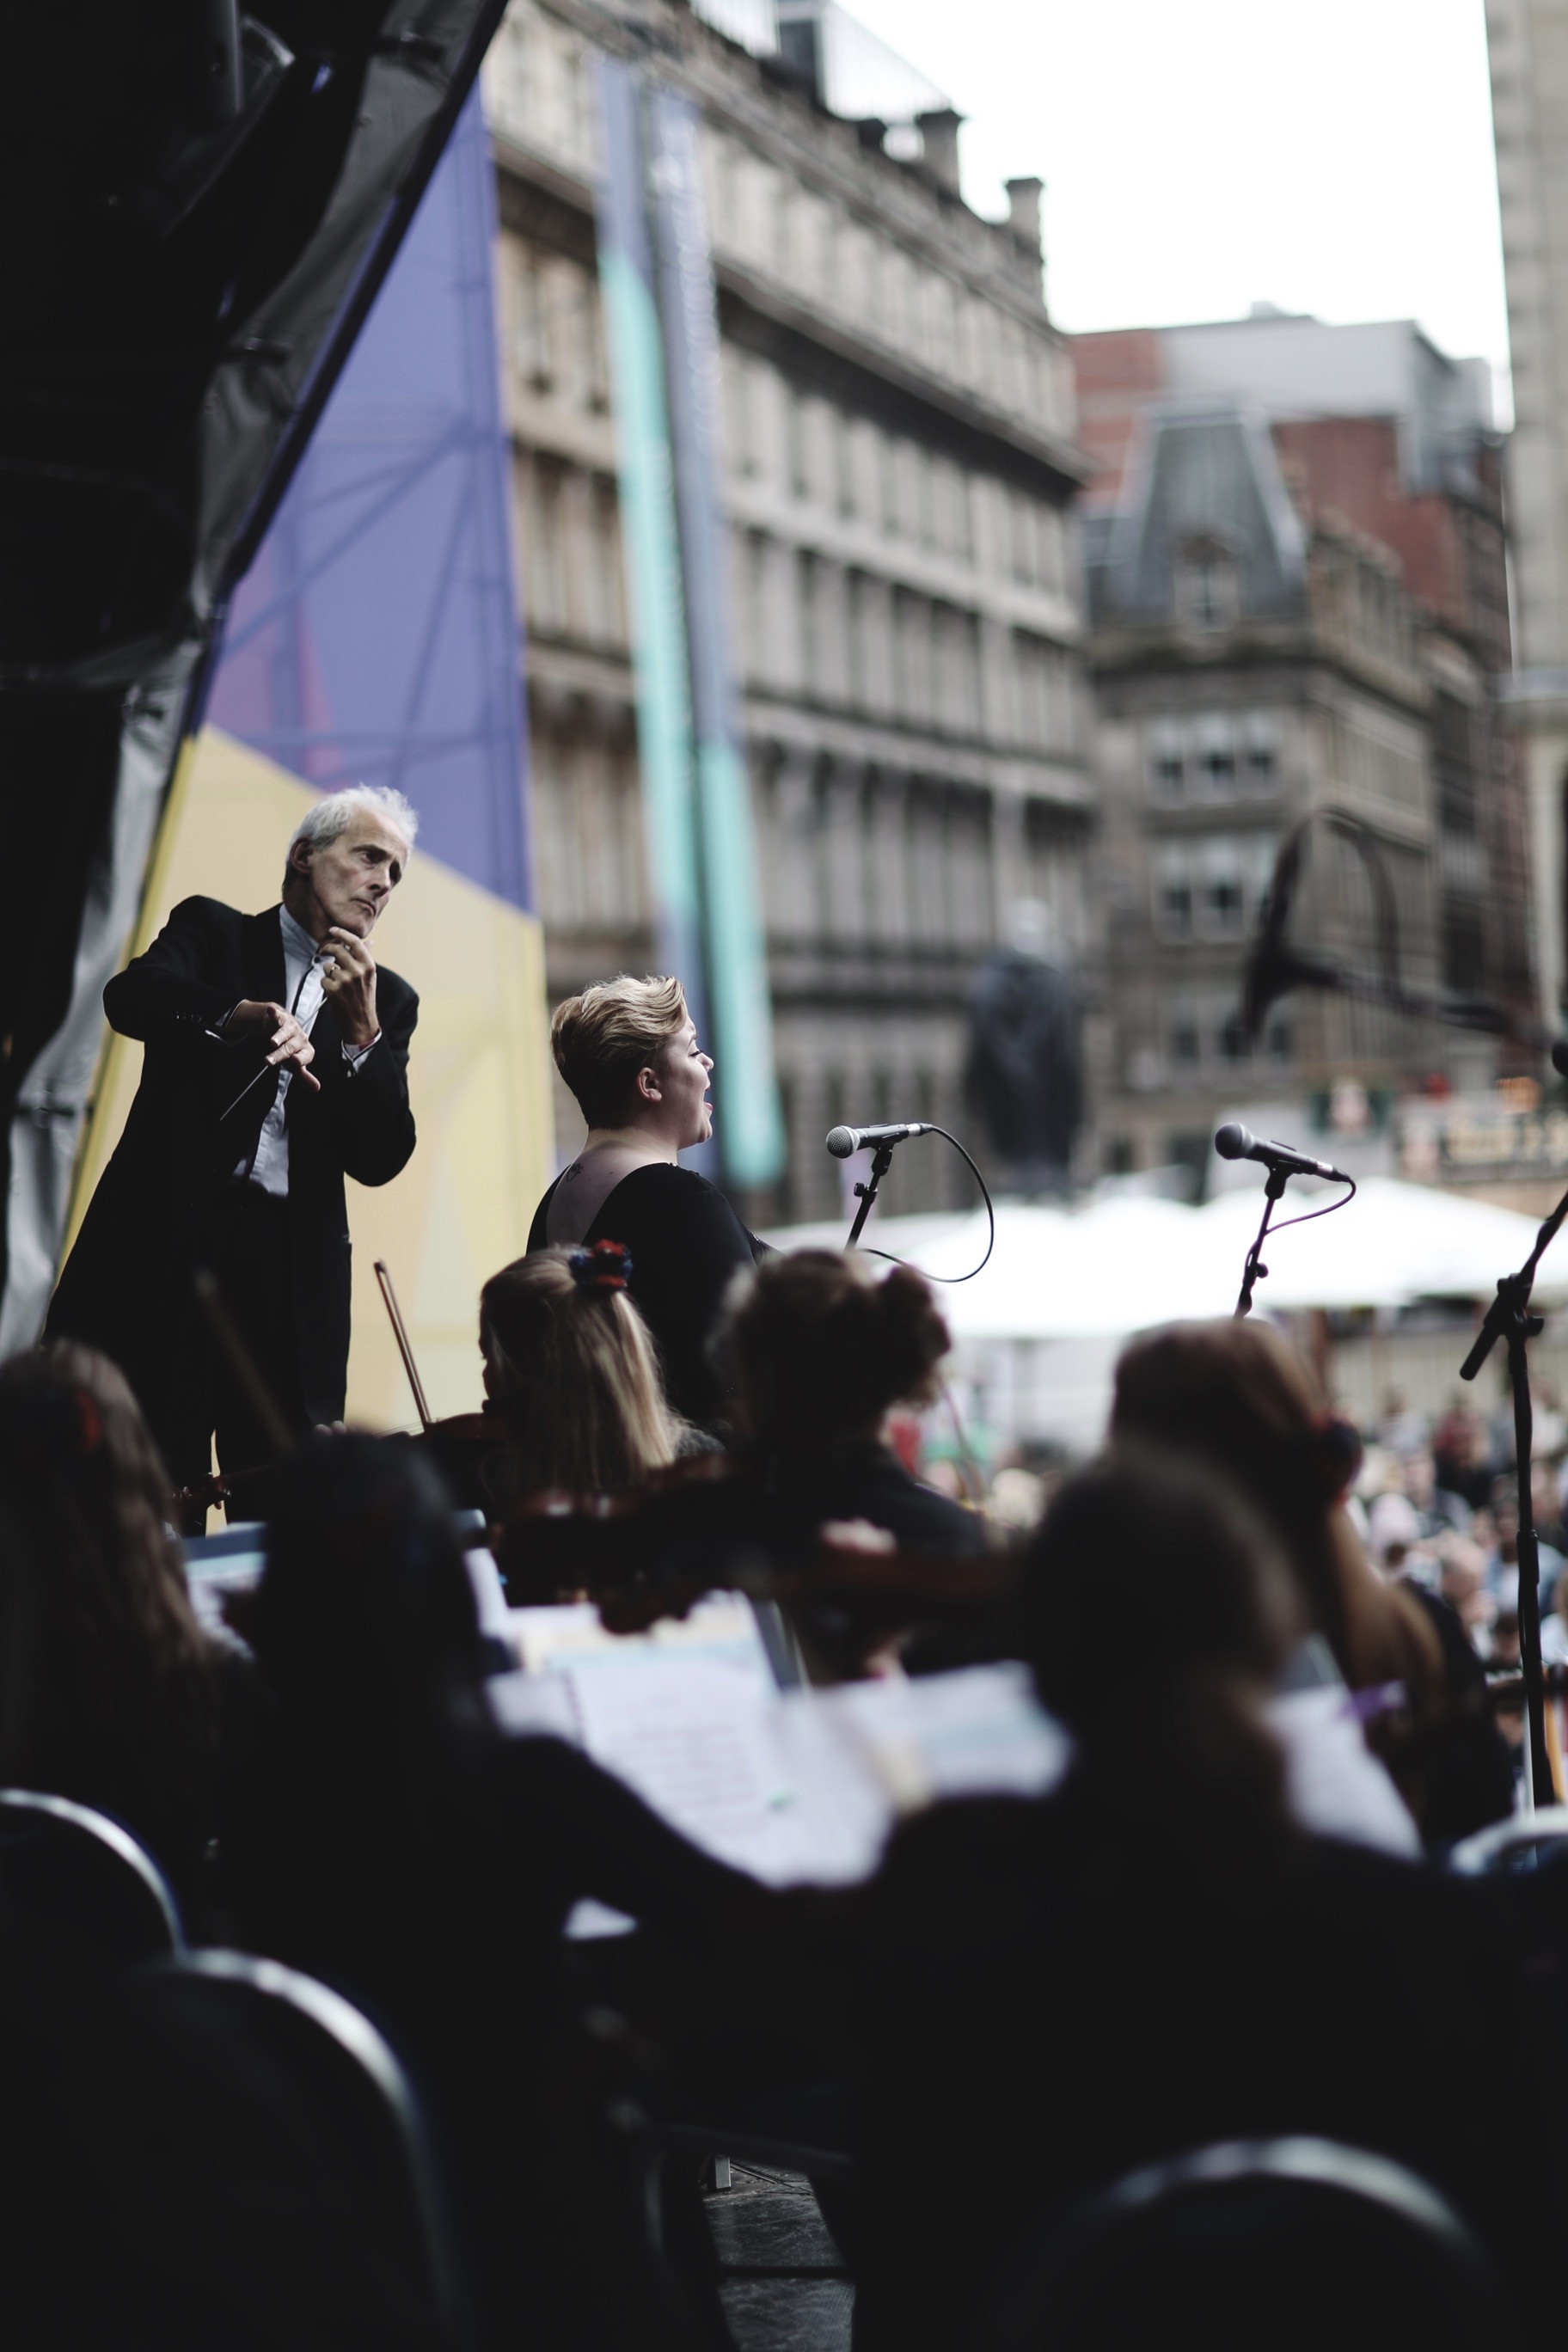 Conductor Paul Daniel on stage with Soprano Emma Mockett at Festival 2018 in Glasgow\'s George Square part of the European Championship Games cultural celebrations, August 2018.